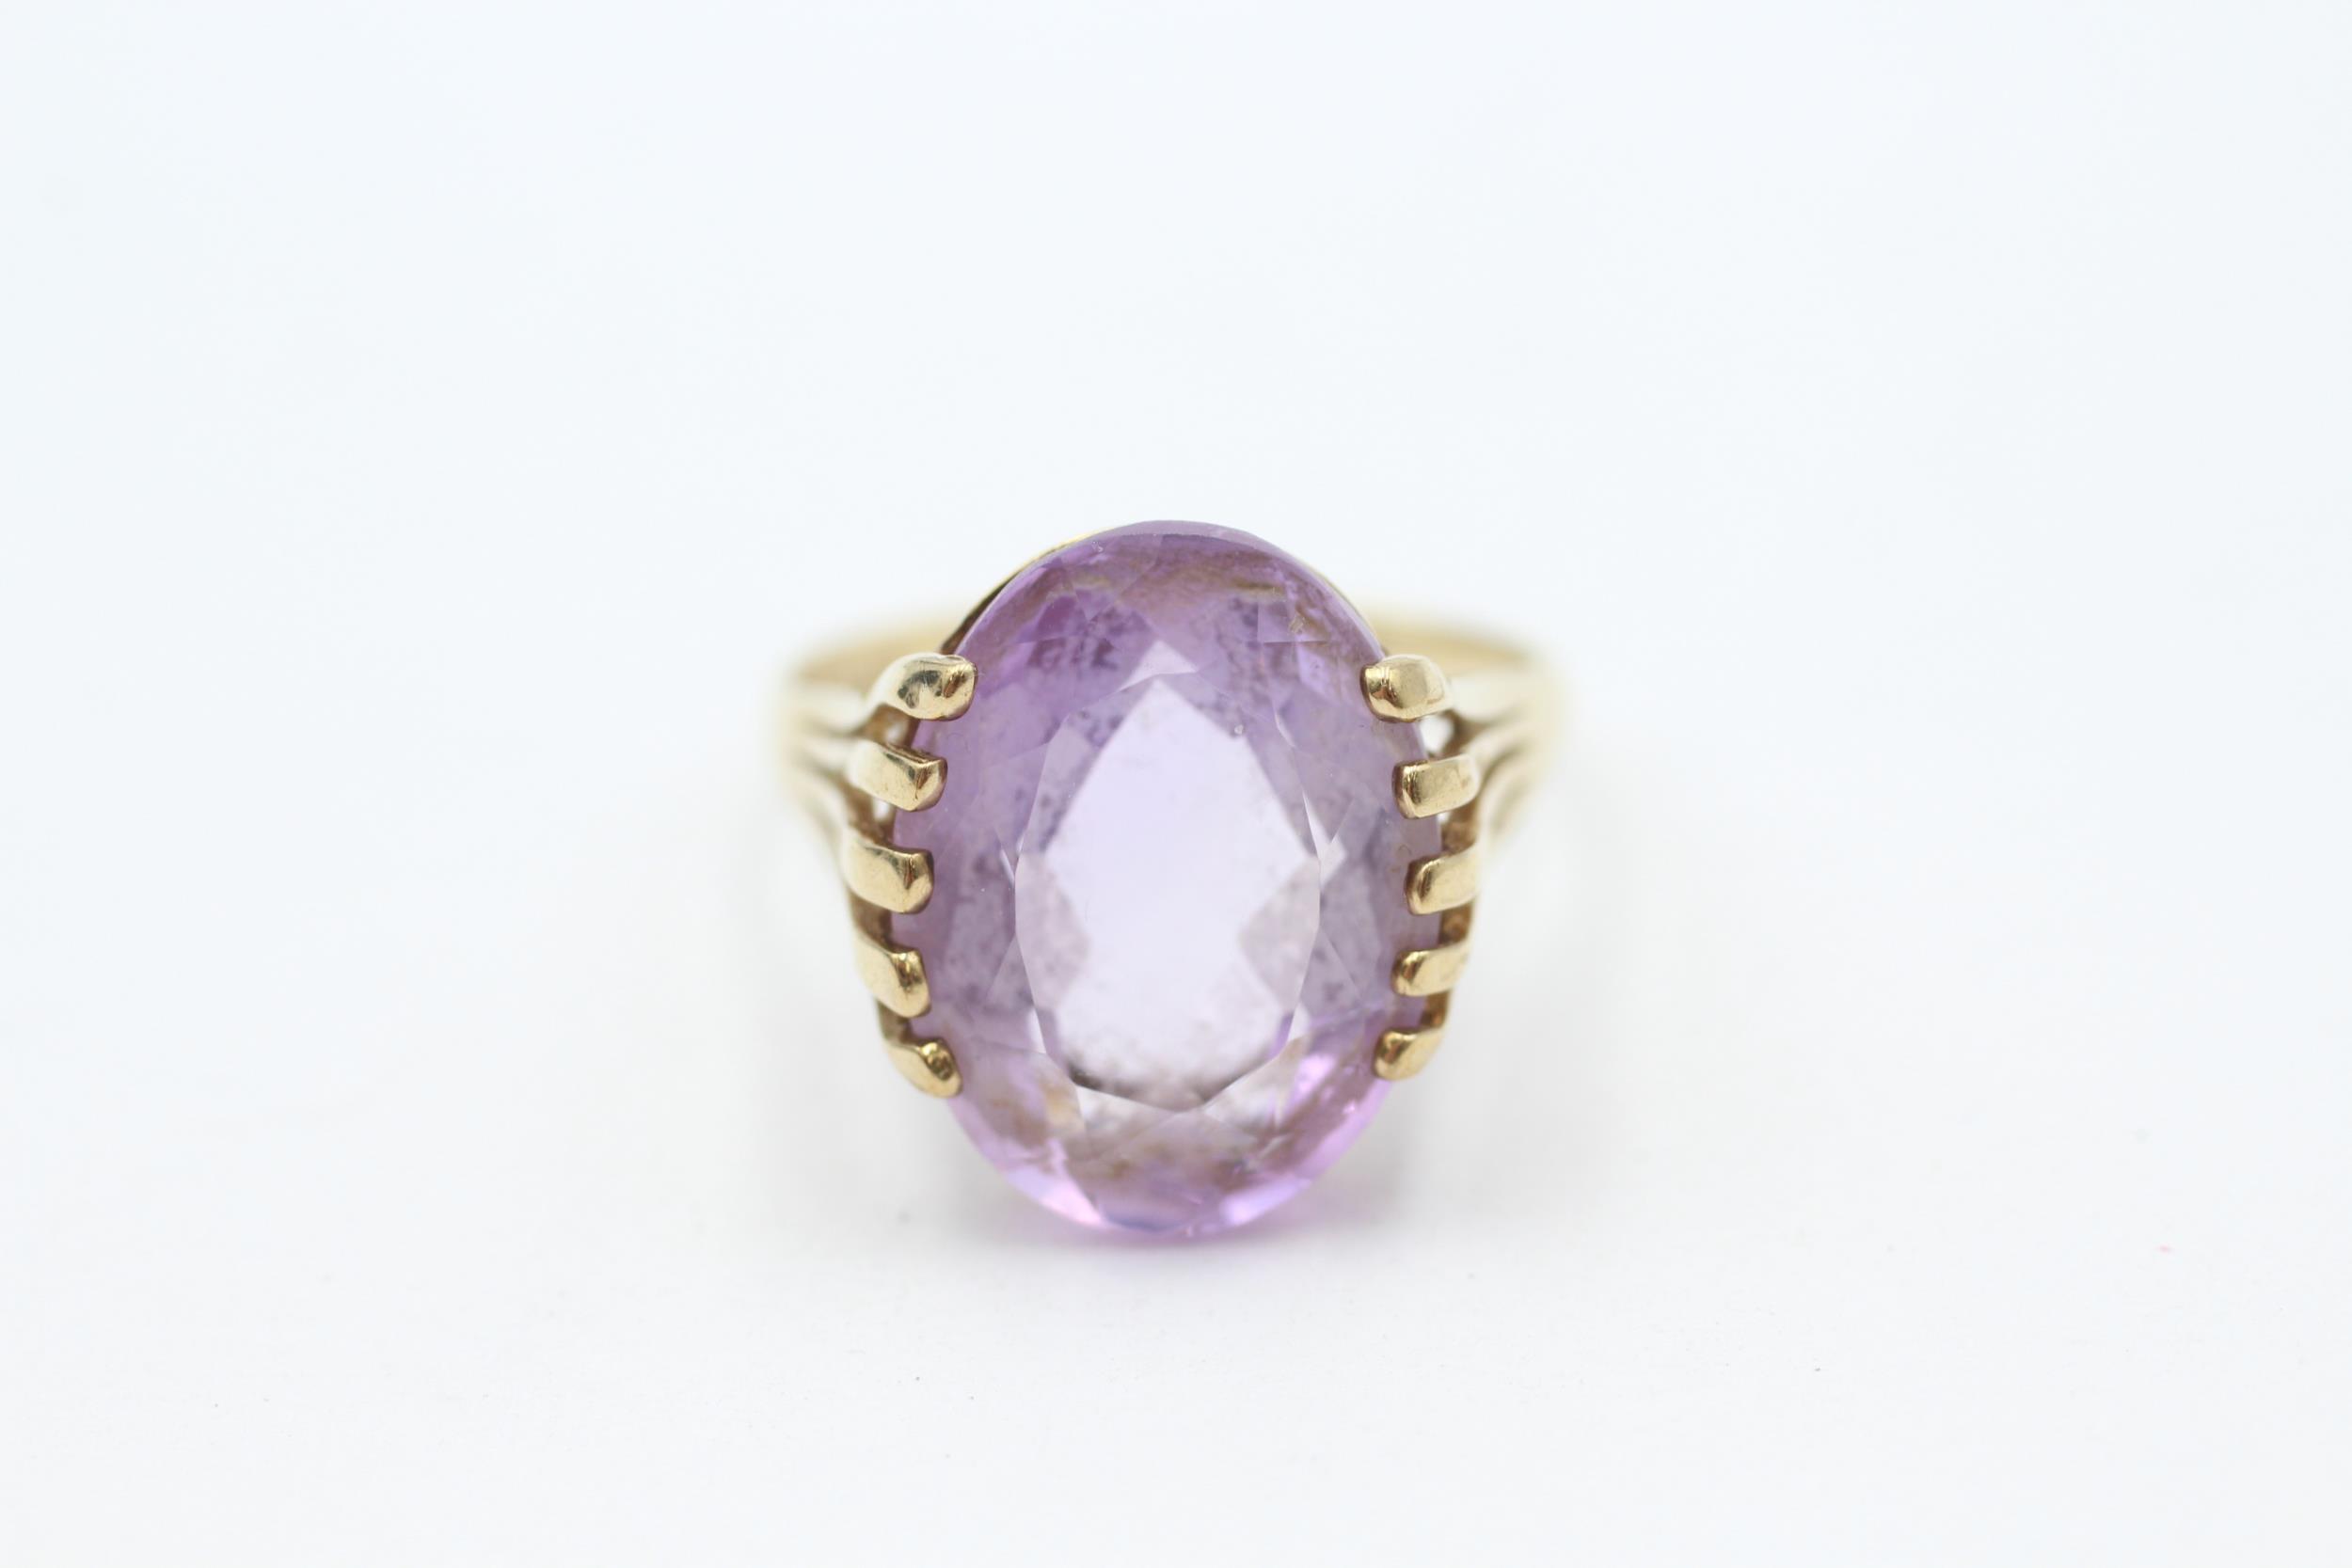 9ct gold oval amethyst single stone cocktail ring - MISHAPEN - AS SEEN Size L 1/2 - 4 g